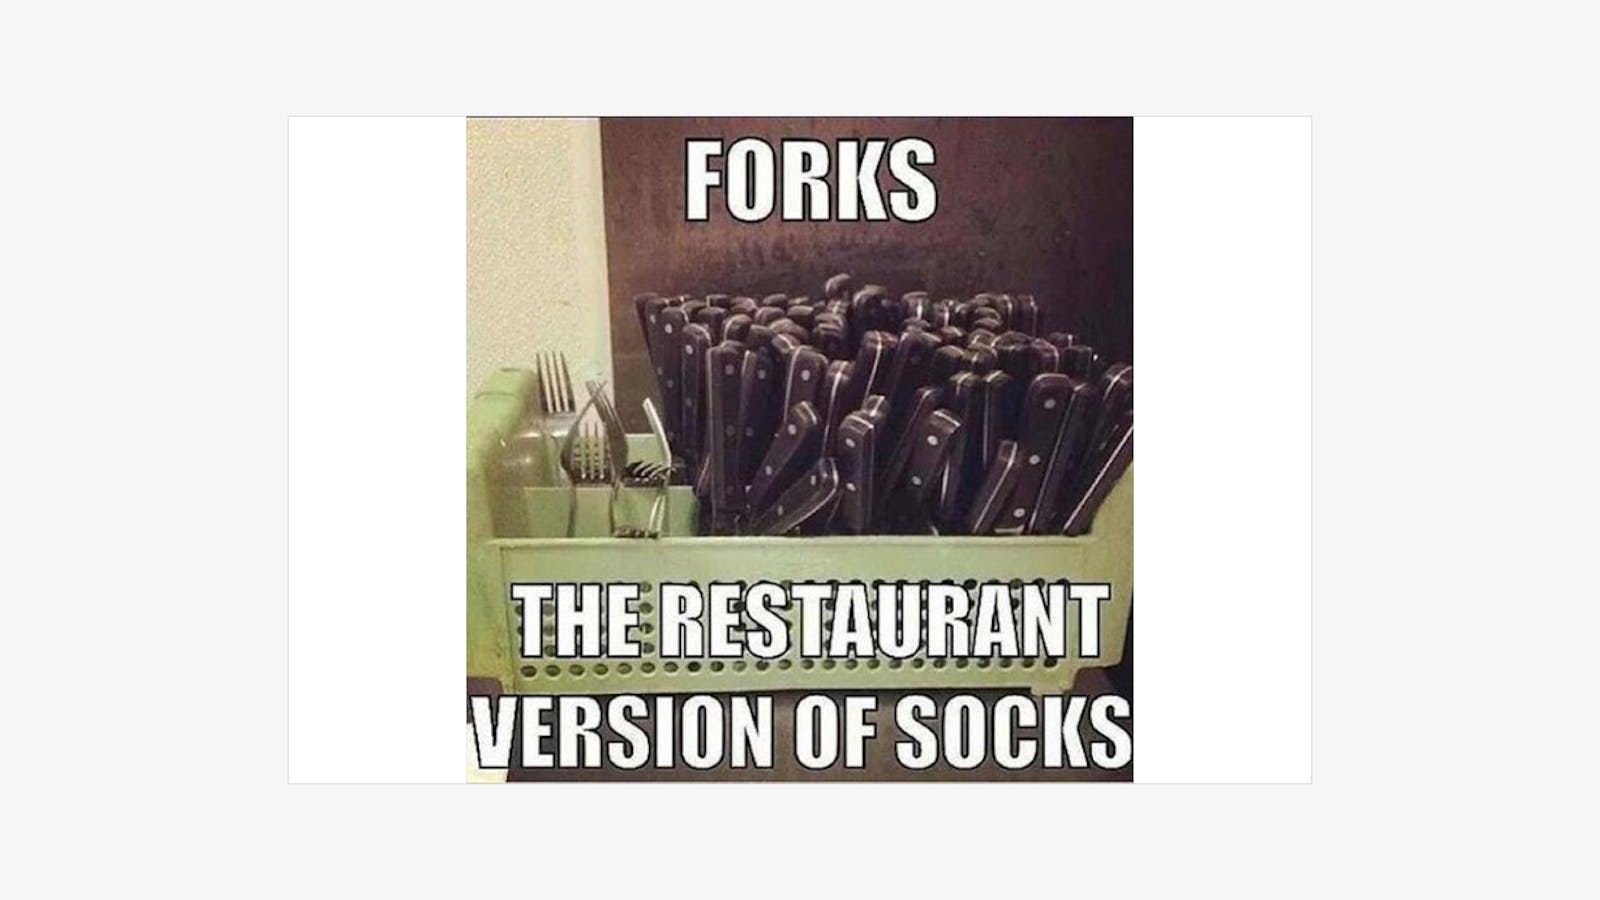 Funny meme about how forks are the restaurant version of socks. 